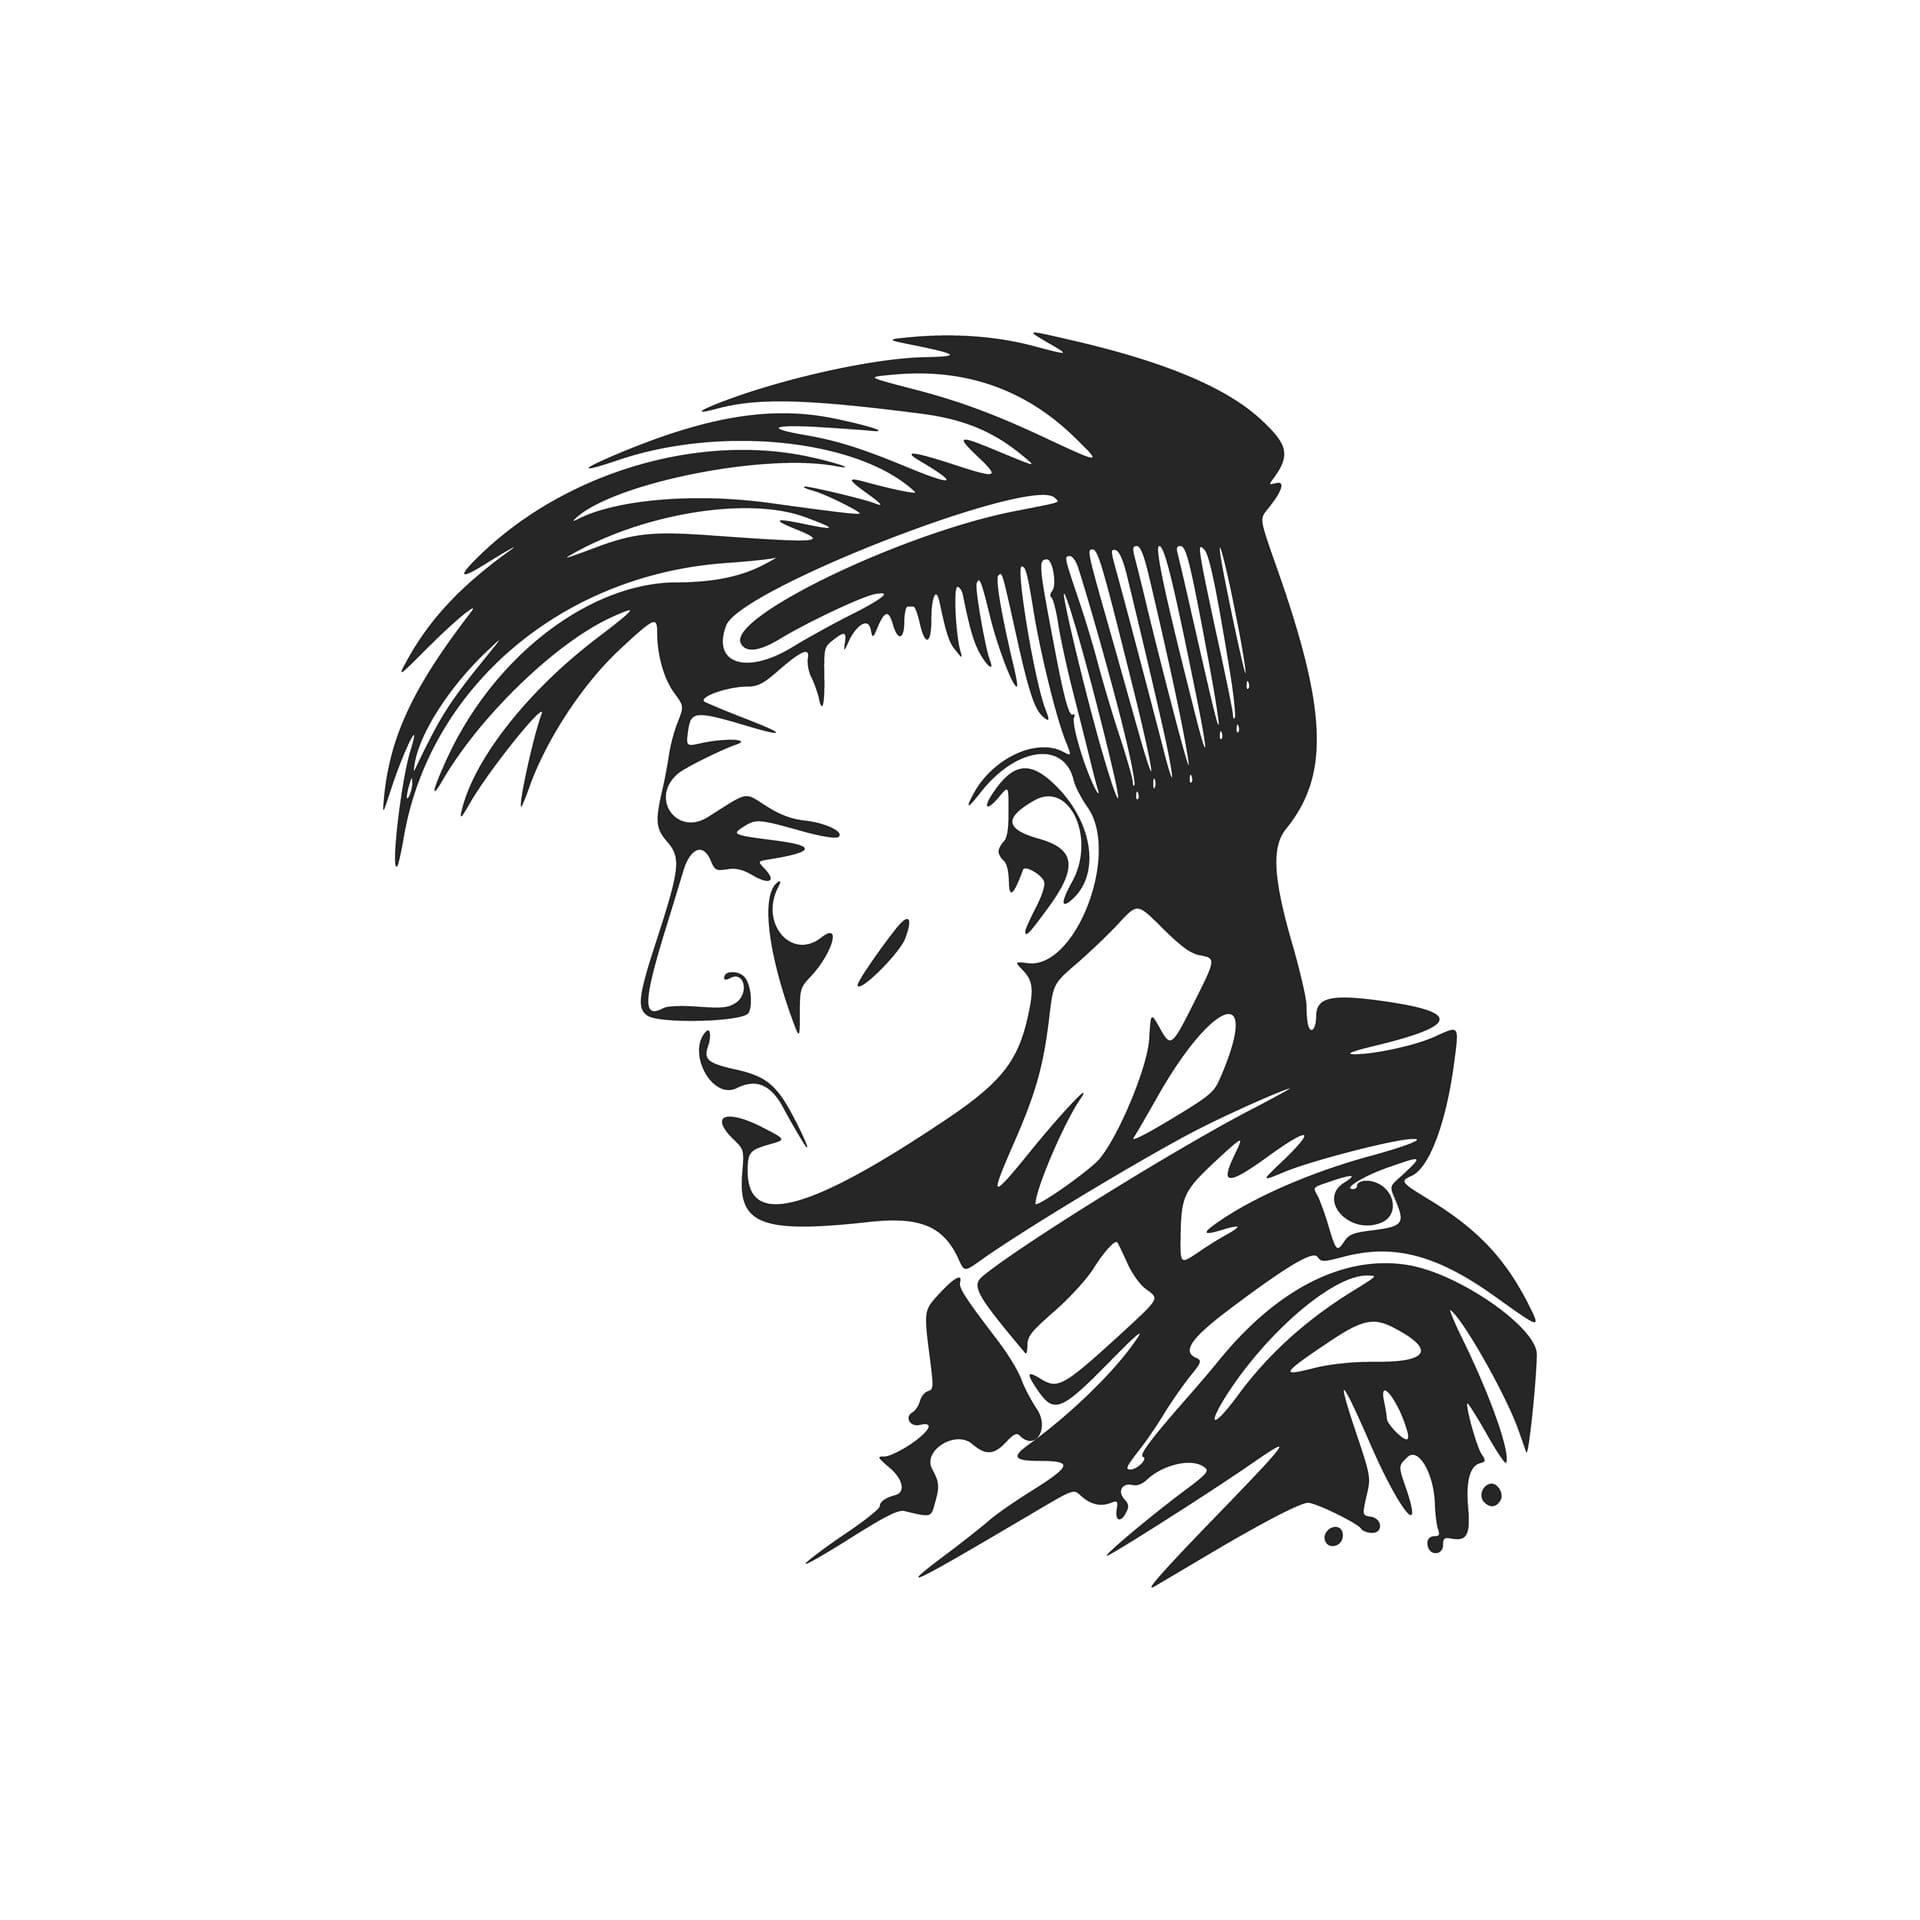 Black white minimalist depicting soldier military profile pictures